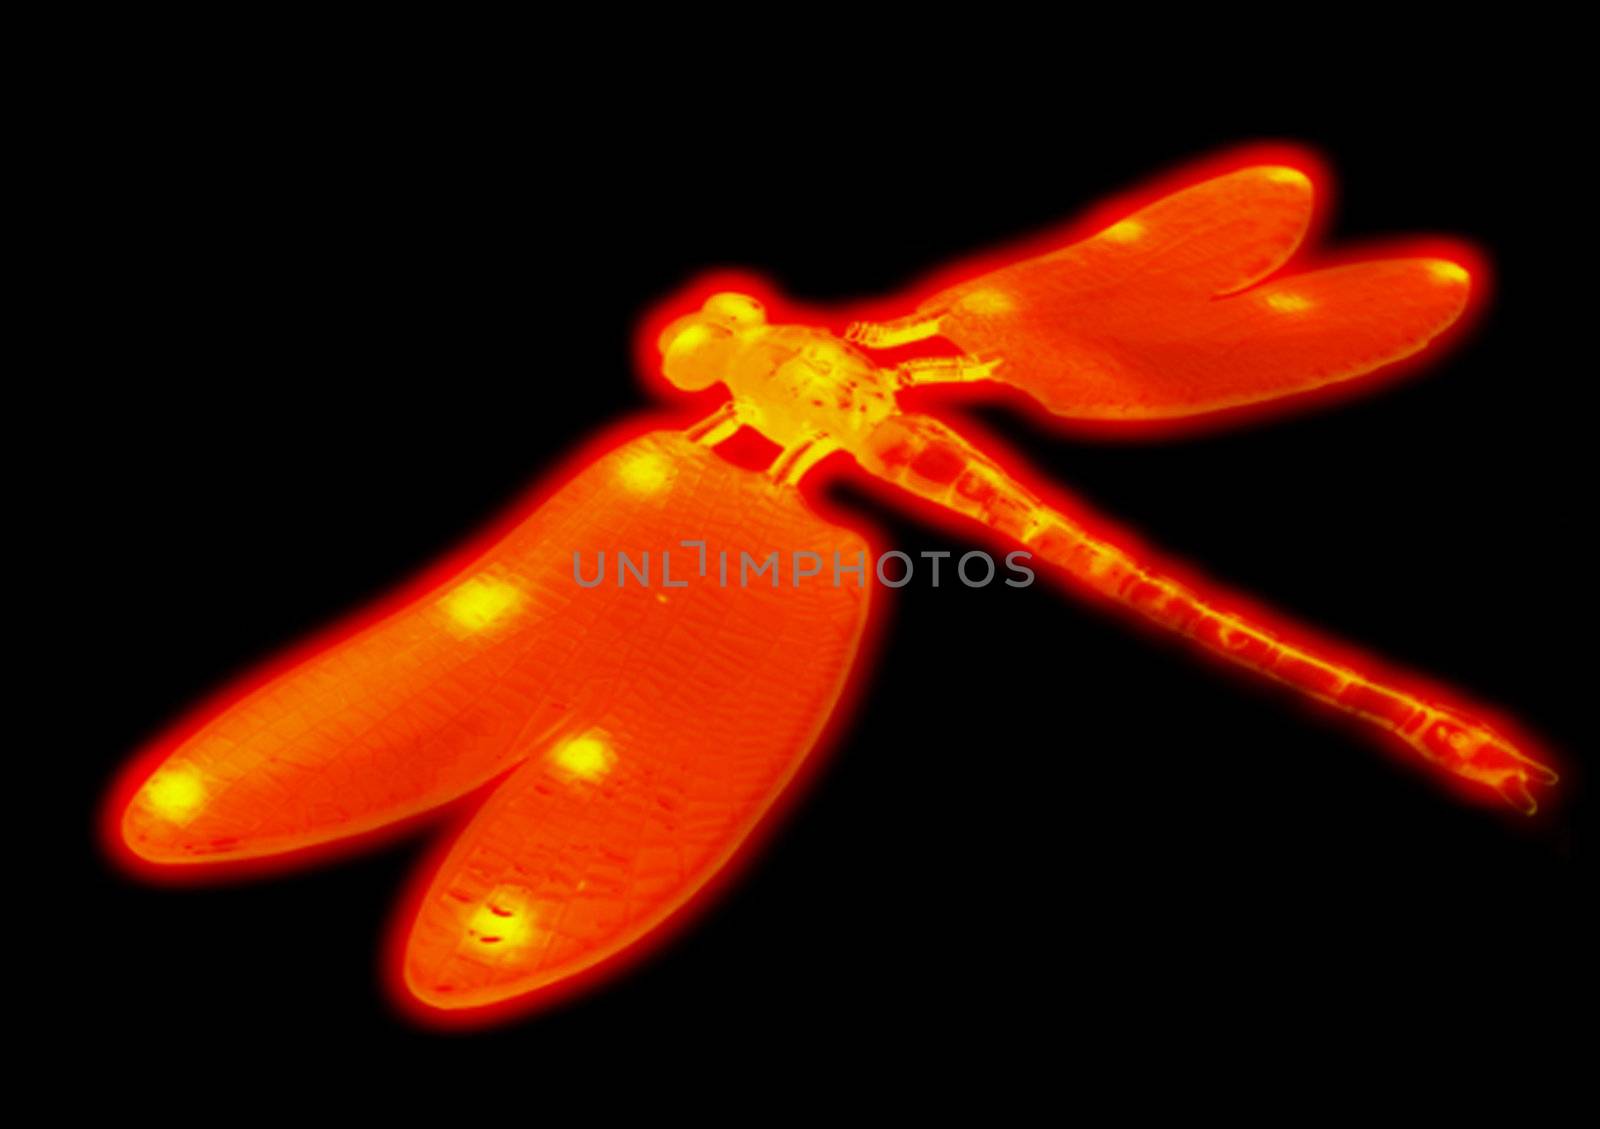 fiery dragonfly, red dragonfly, dragonfly flies, the wings of dragonflies, yellow wings, translucent tail, insect dragonfly, dragonfly toy